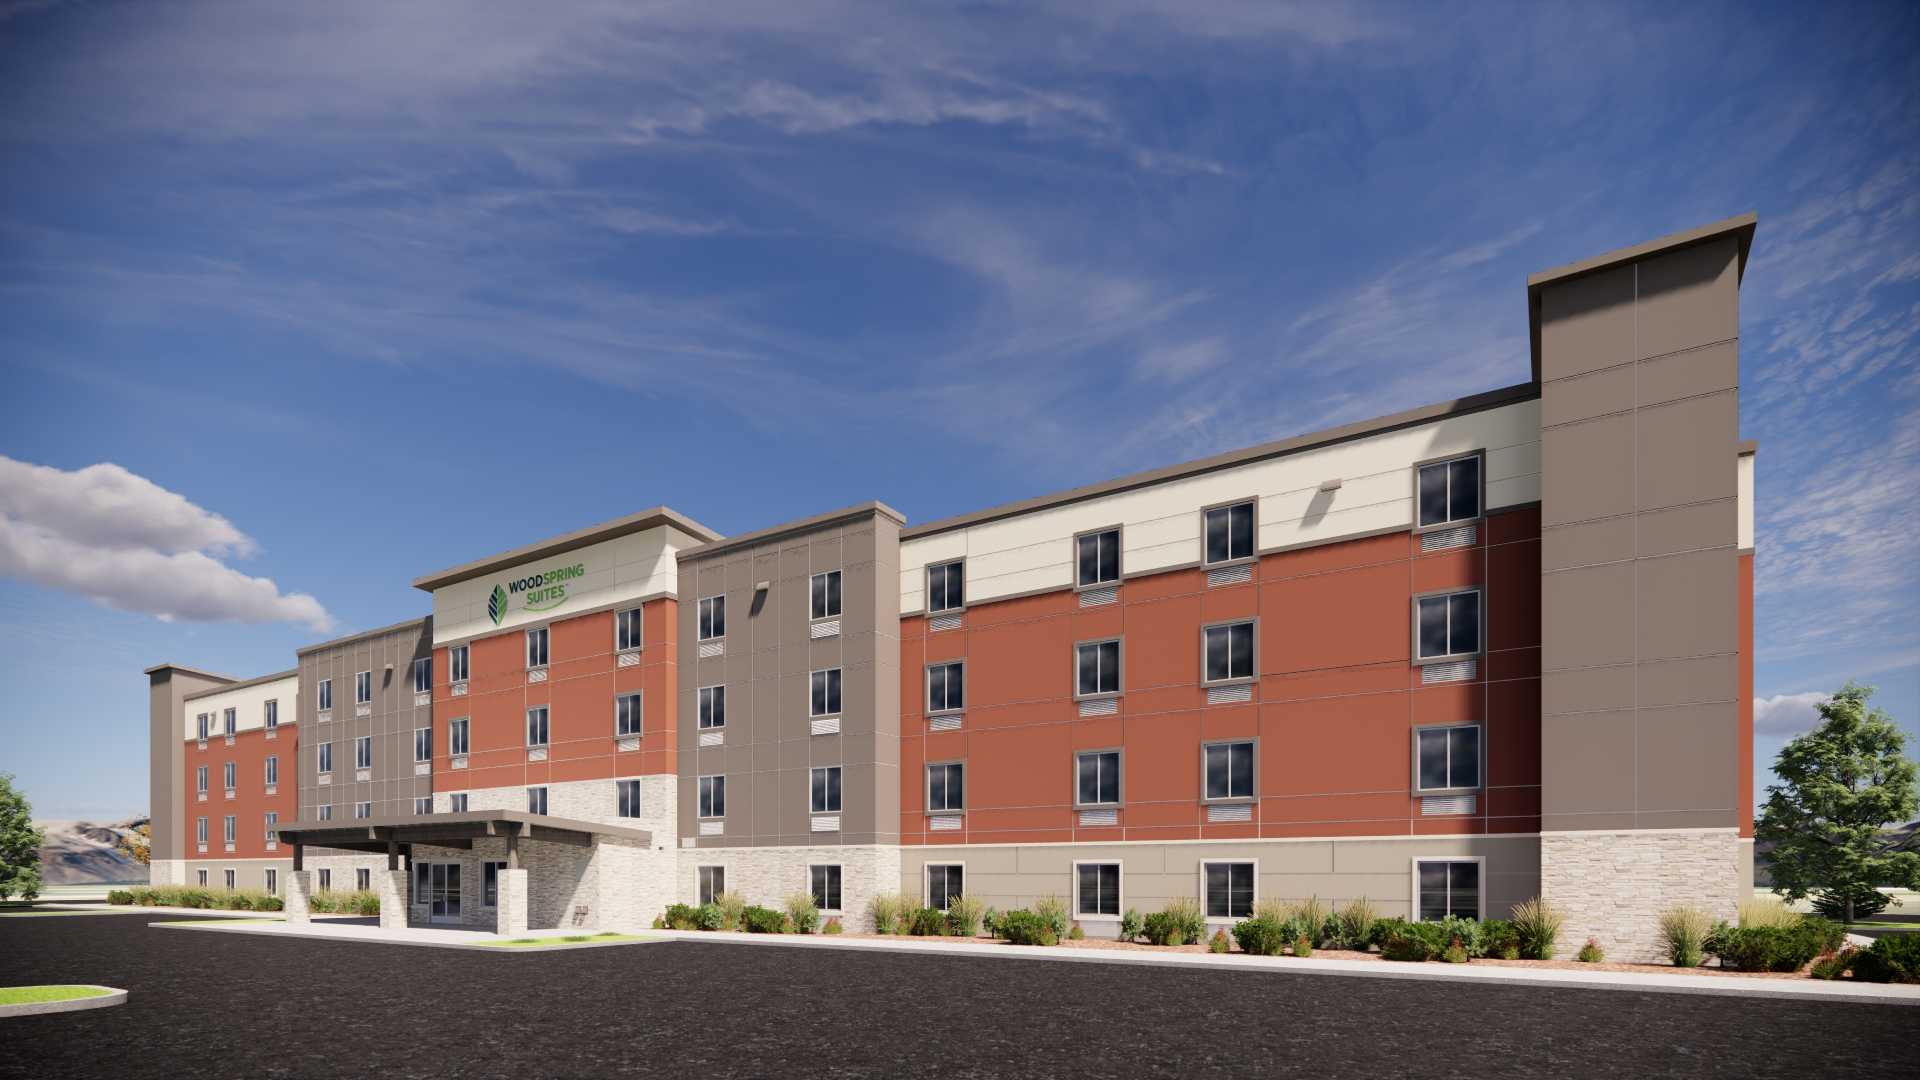 Avison Young completes land parcel acquisition for development of 122- room hotel in Centennial, CO